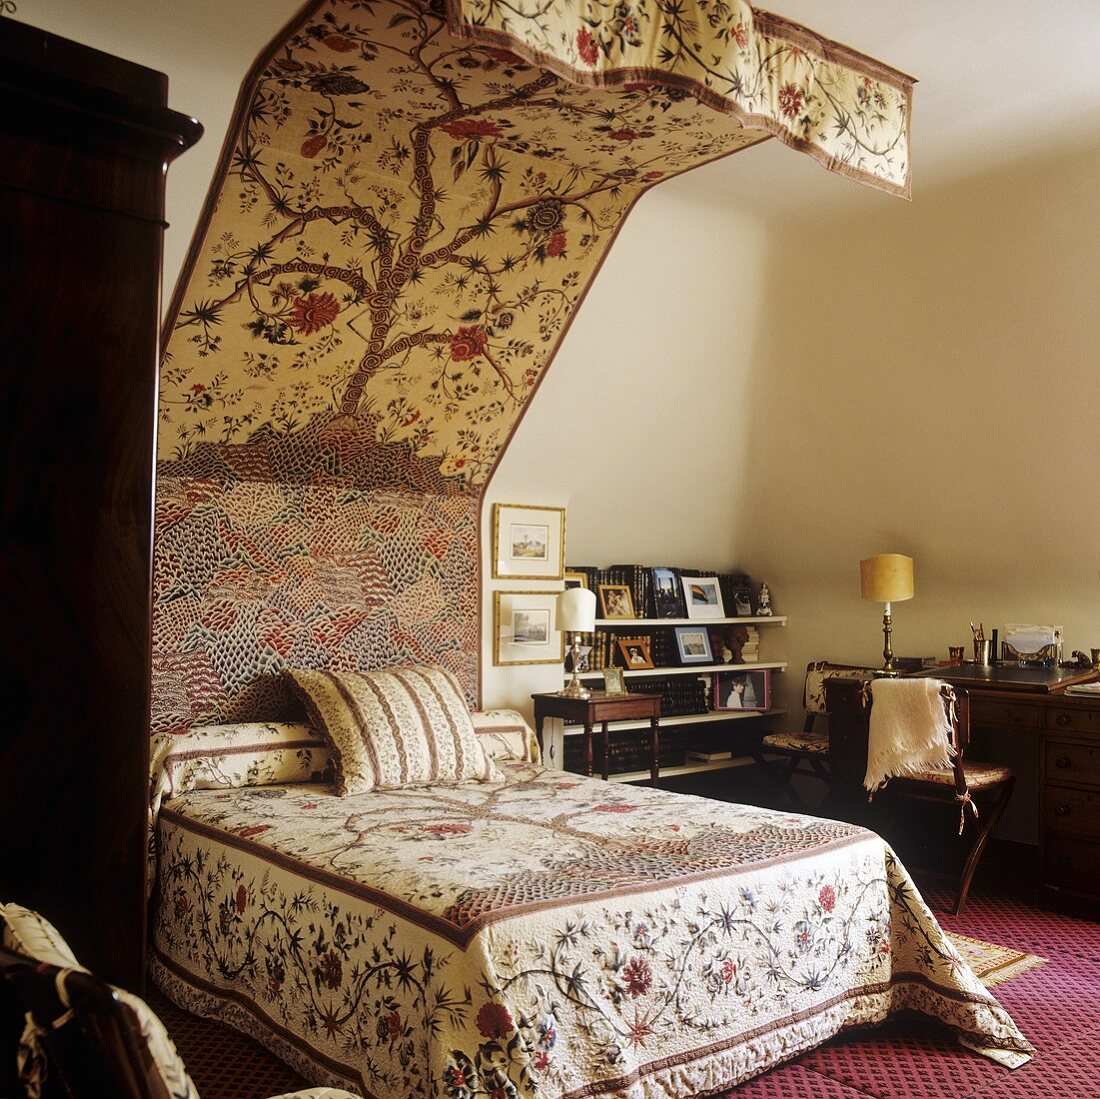 A queen-sized bed and a canopy with the same floral patterned fabric